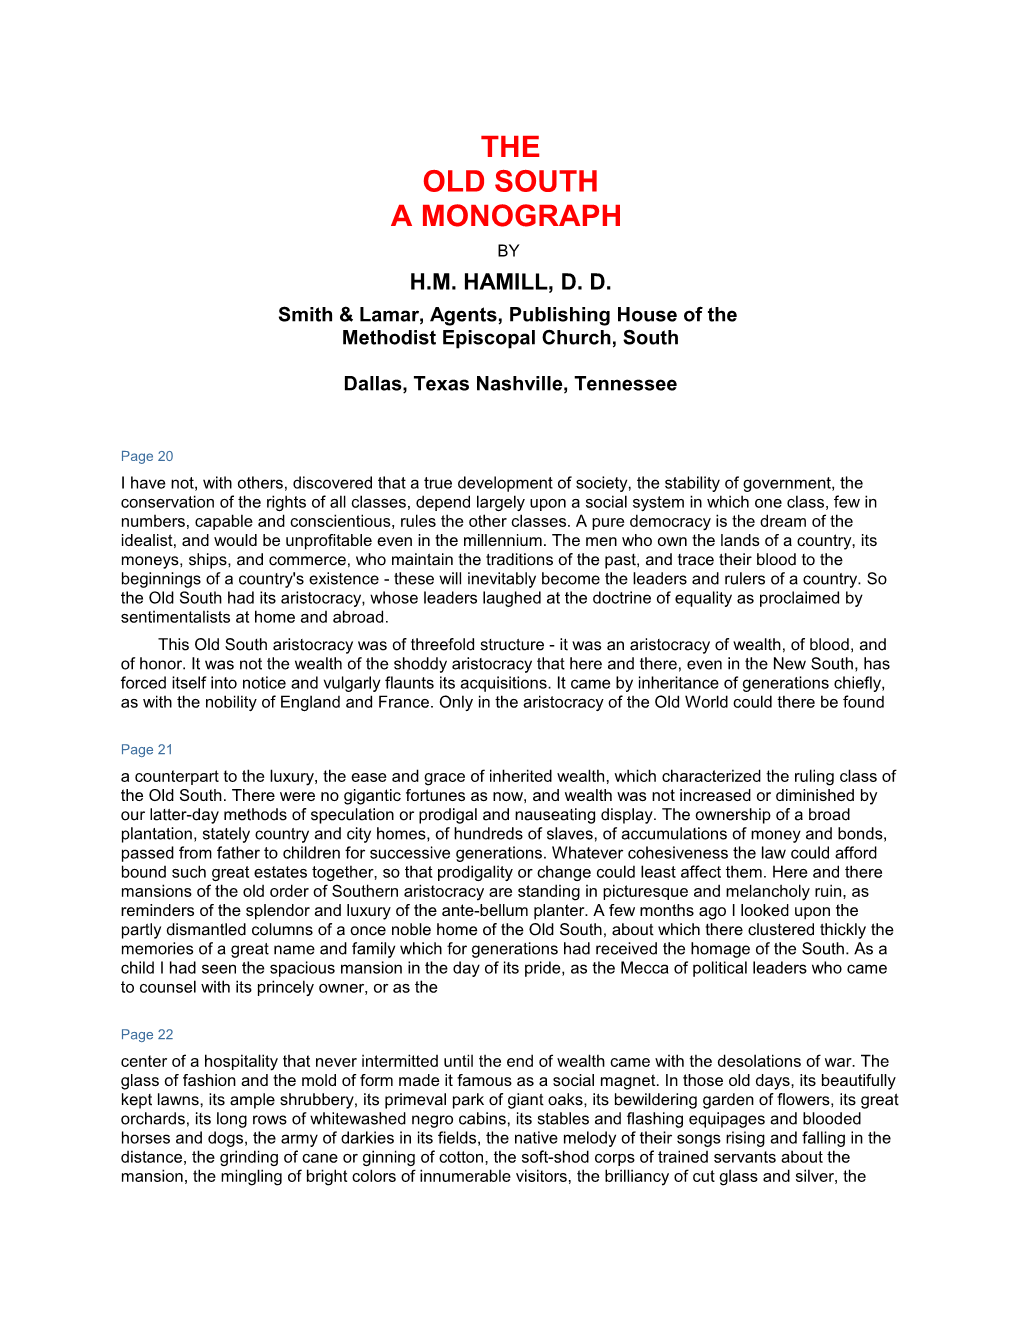 The Old South a Monograph